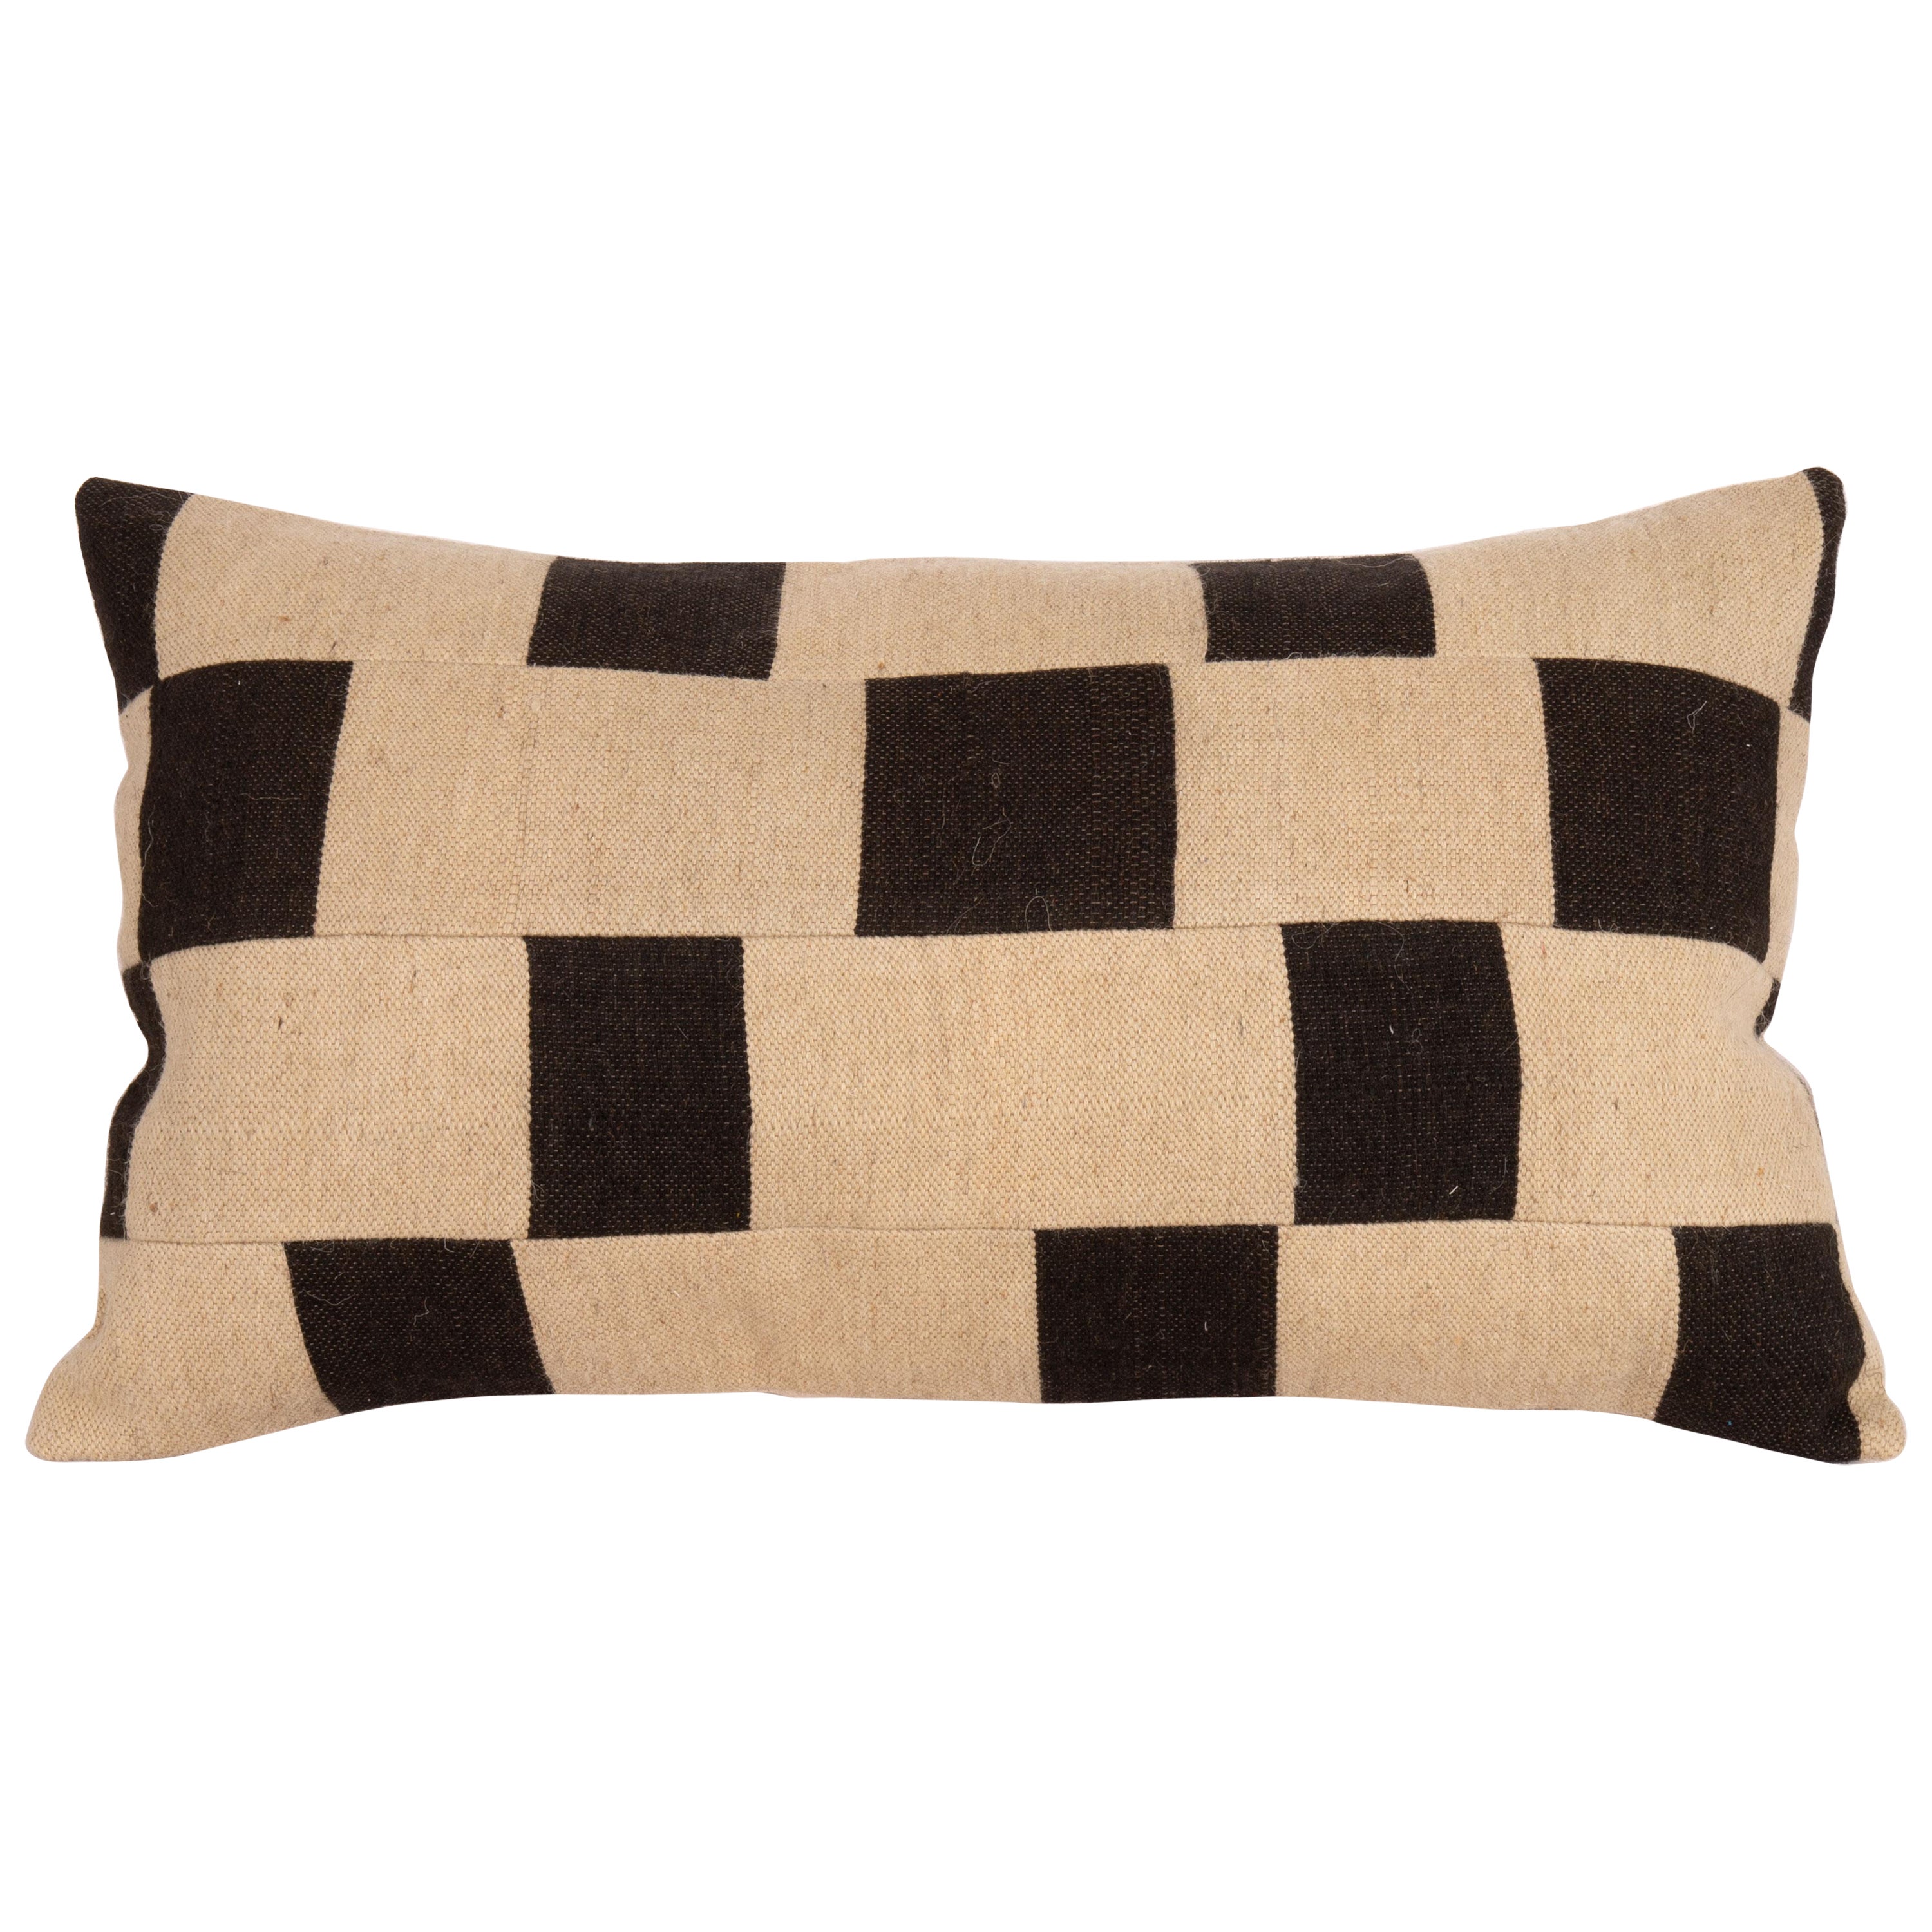 Pillow Case Made from a Contemporary Hand Loomed Wool Fabric